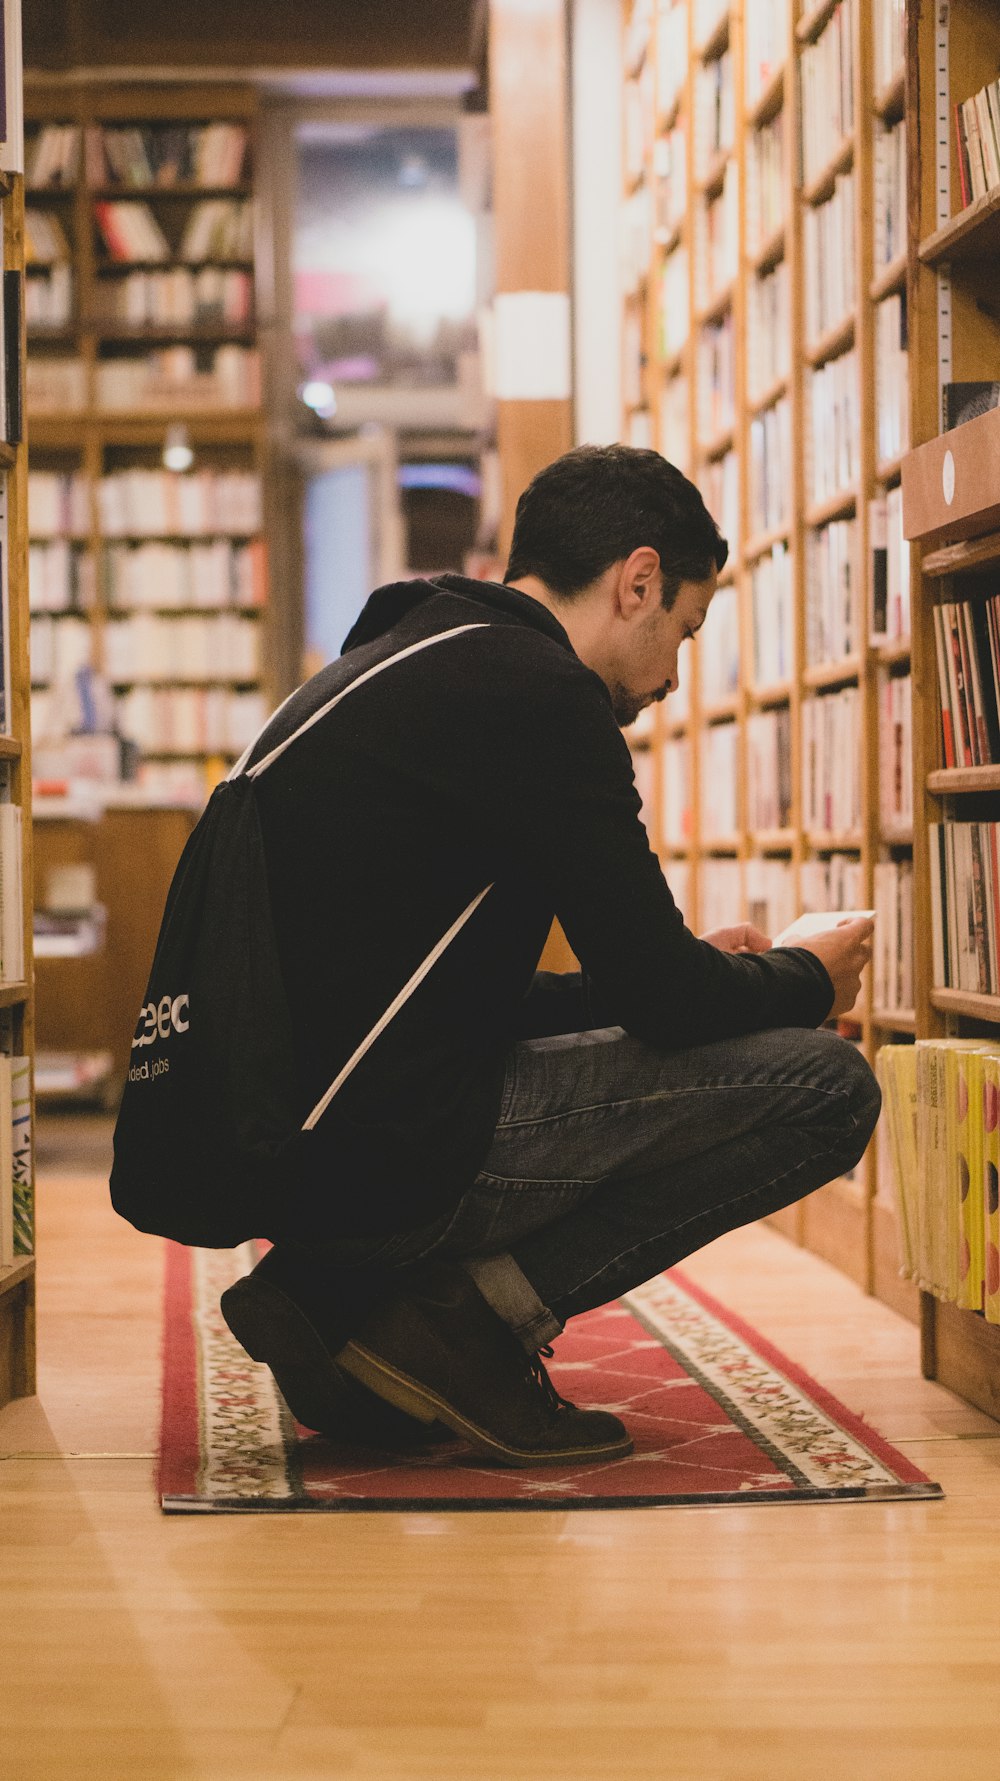 man squatting in front book shelves